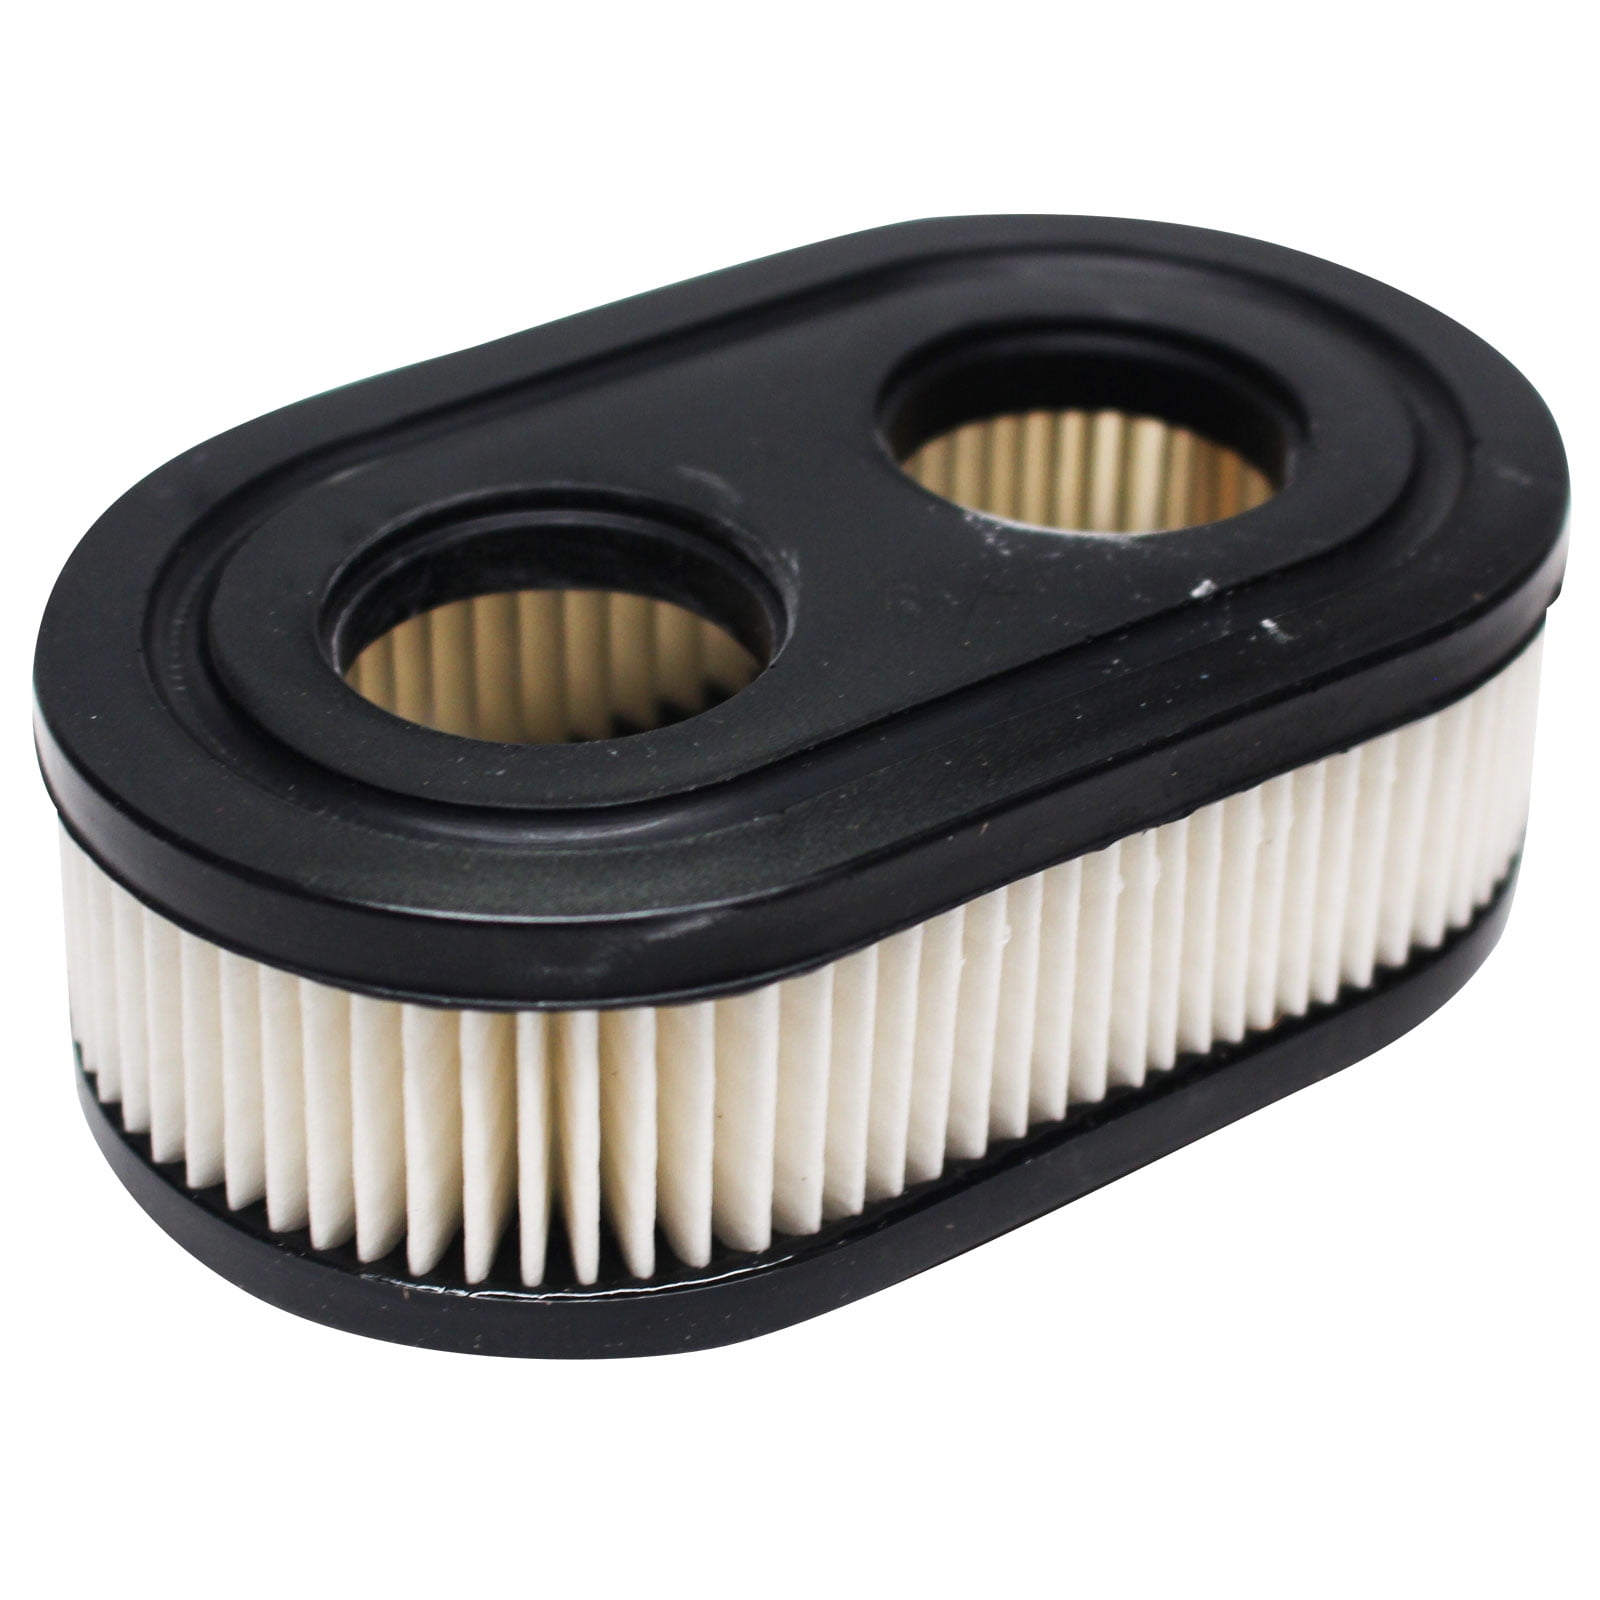 593260 798452 Air Filter Cartridge for Briggs & Stratton 550e-550ex 009P000 Troy 